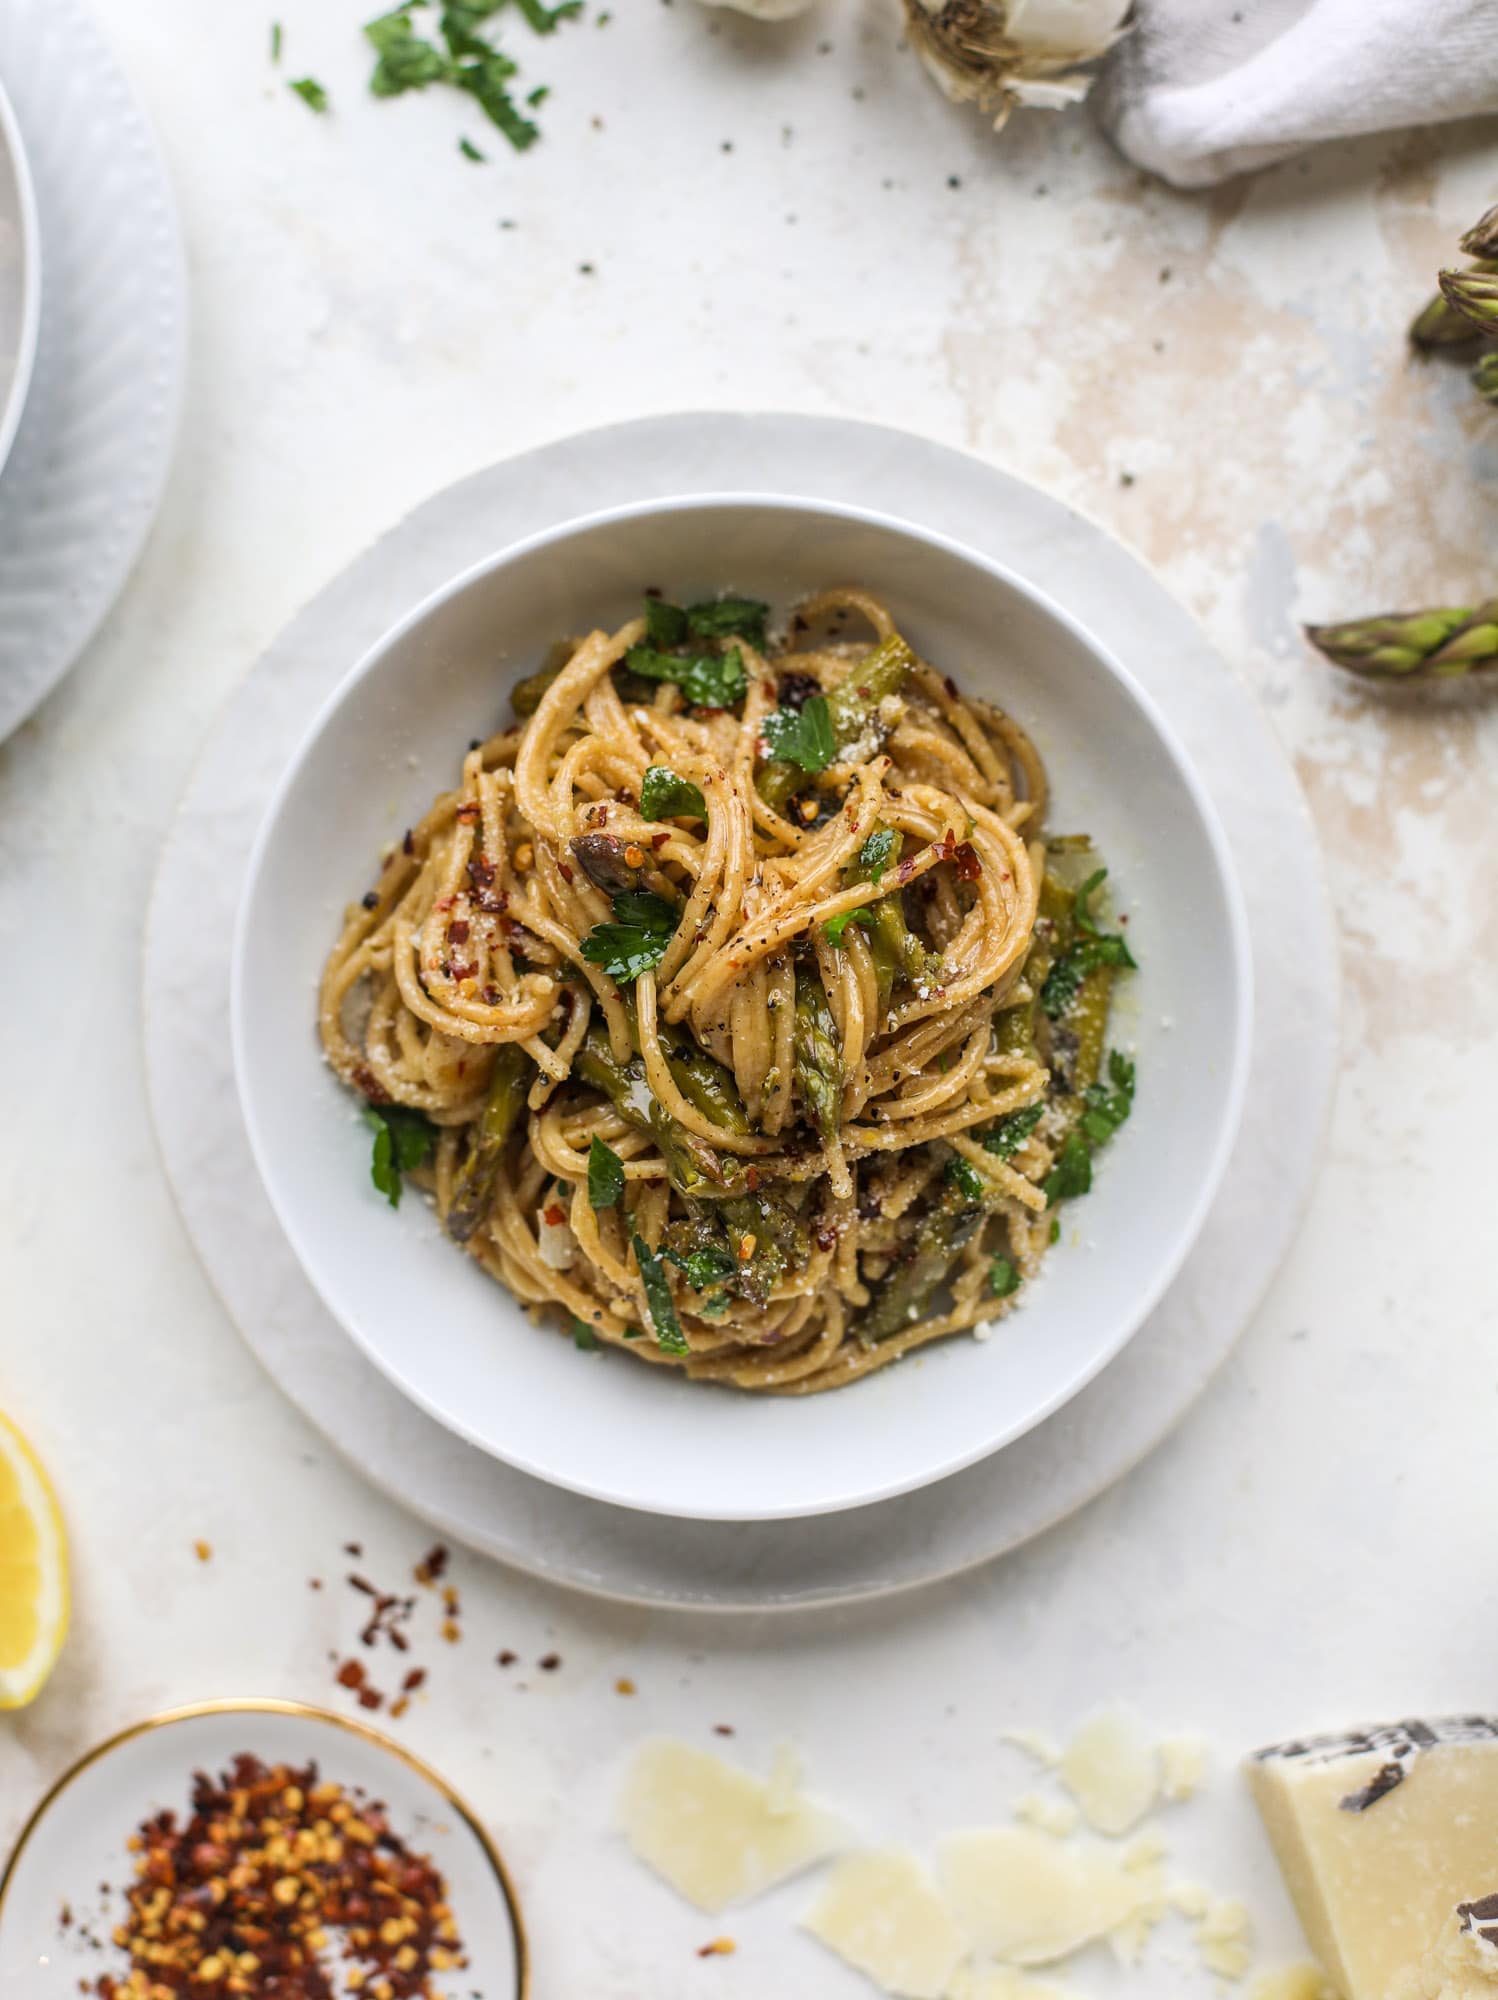 A perfect one pot pasta made with asparagus, shallots, lemon and mascarpone chese. The best weeknight dinner that comes together in a snap! I howsweeteats.com #asparagus #onepotpasta